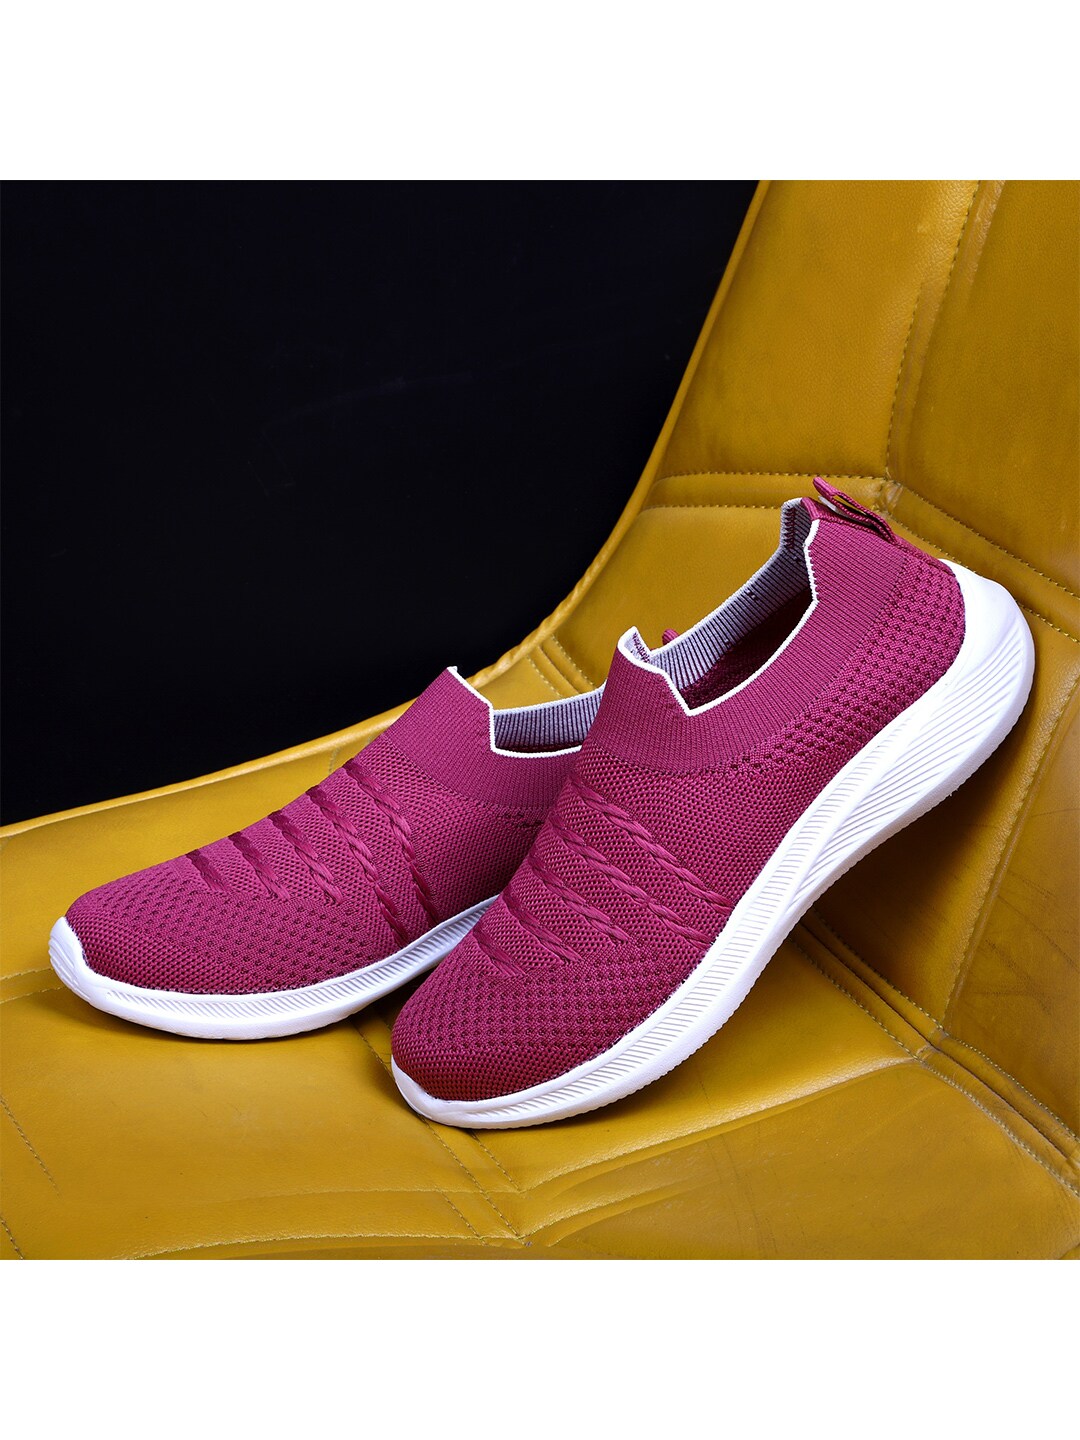 TPENT Women Magenta Mesh Running Non-Marking Shoes Price in India